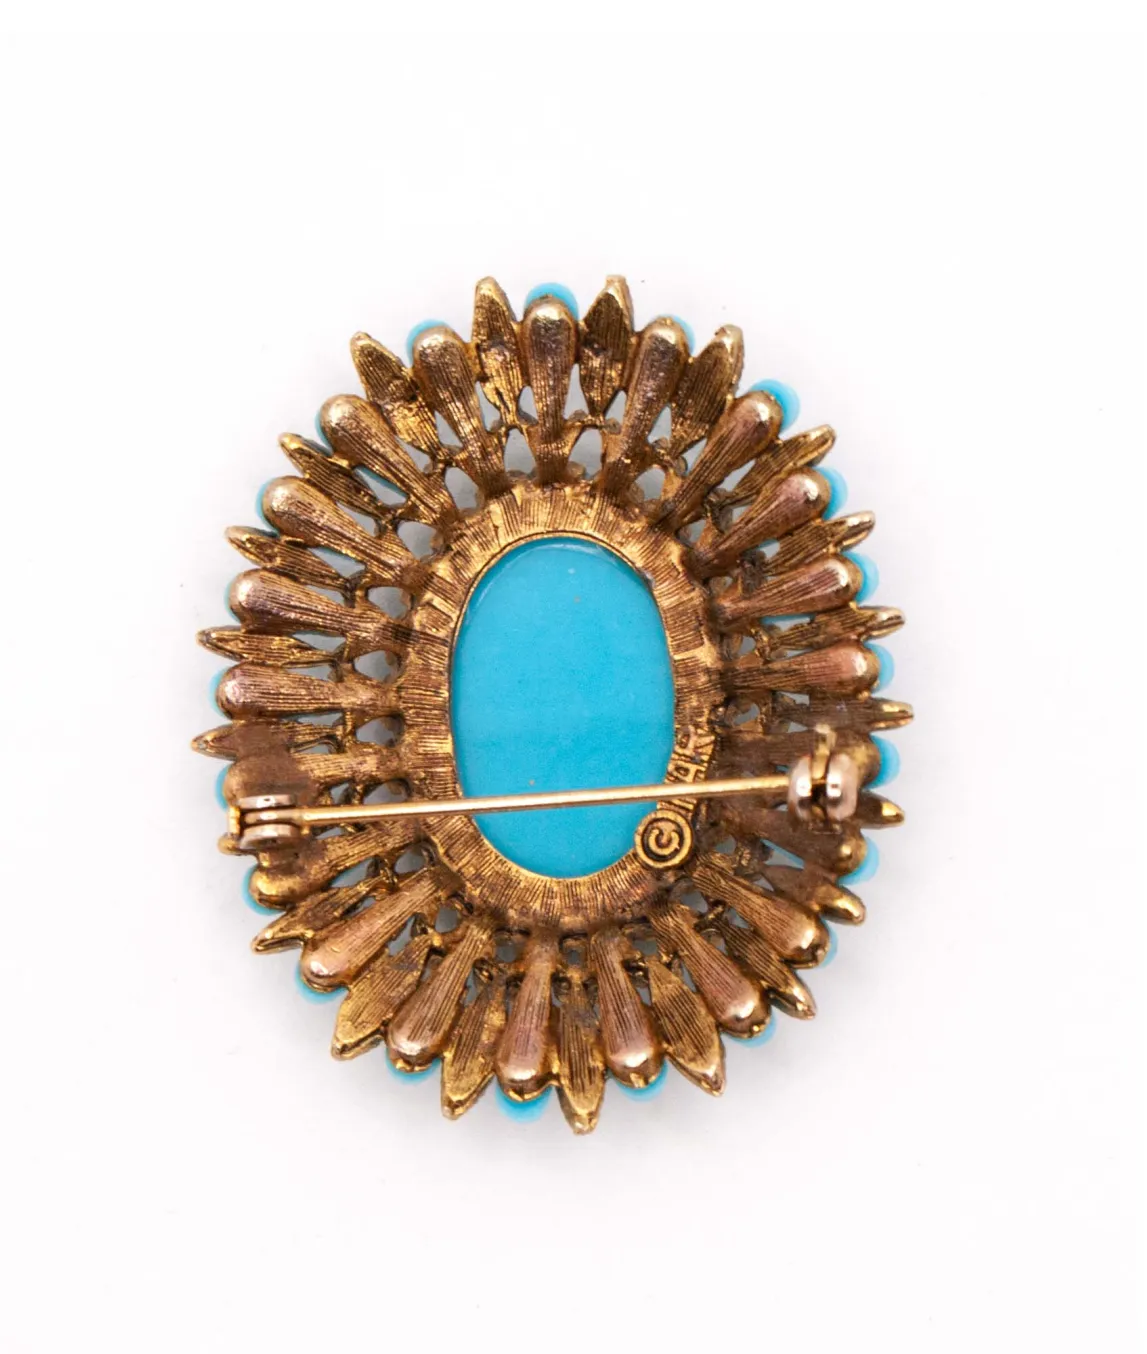 Reverse of oval shaped turquoise glass brooch by HAR with roll clasp